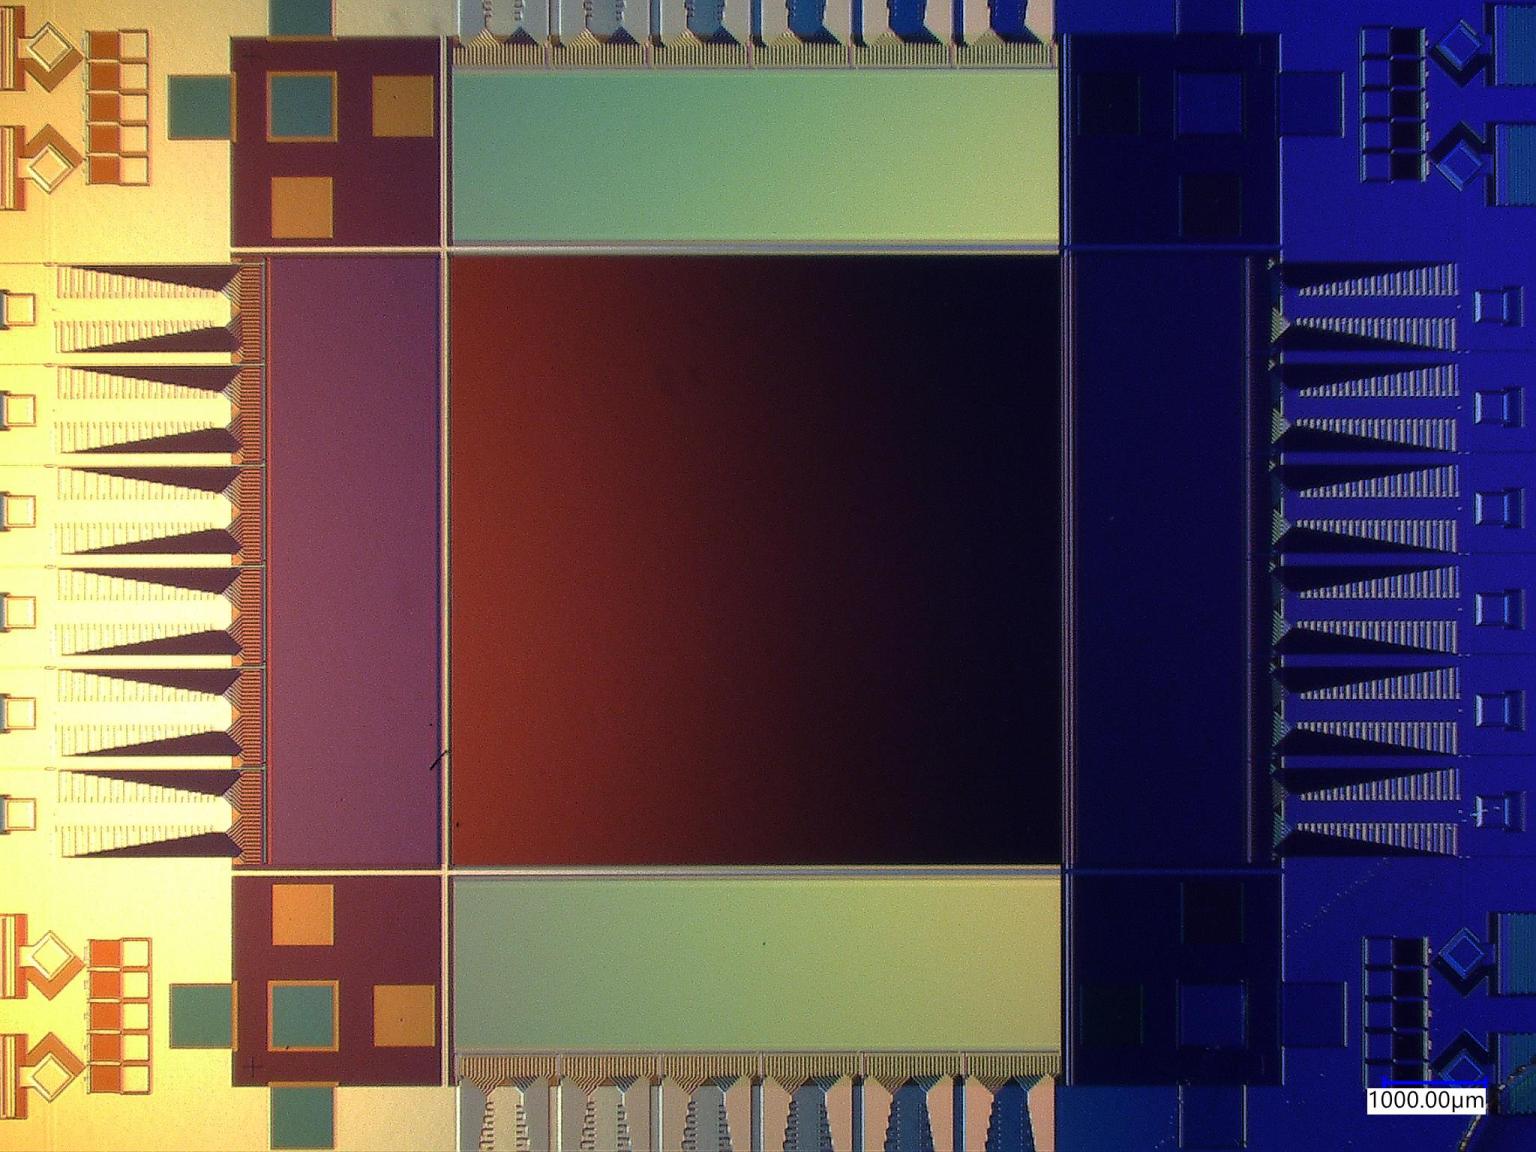 A microscope image of a rectangular chip, showing the different parts of the superconducting camera, including imaging area and ancillary electronics. The chip has a colorful patina, with hues of yellow on the left, red in the center, and blue on the right.